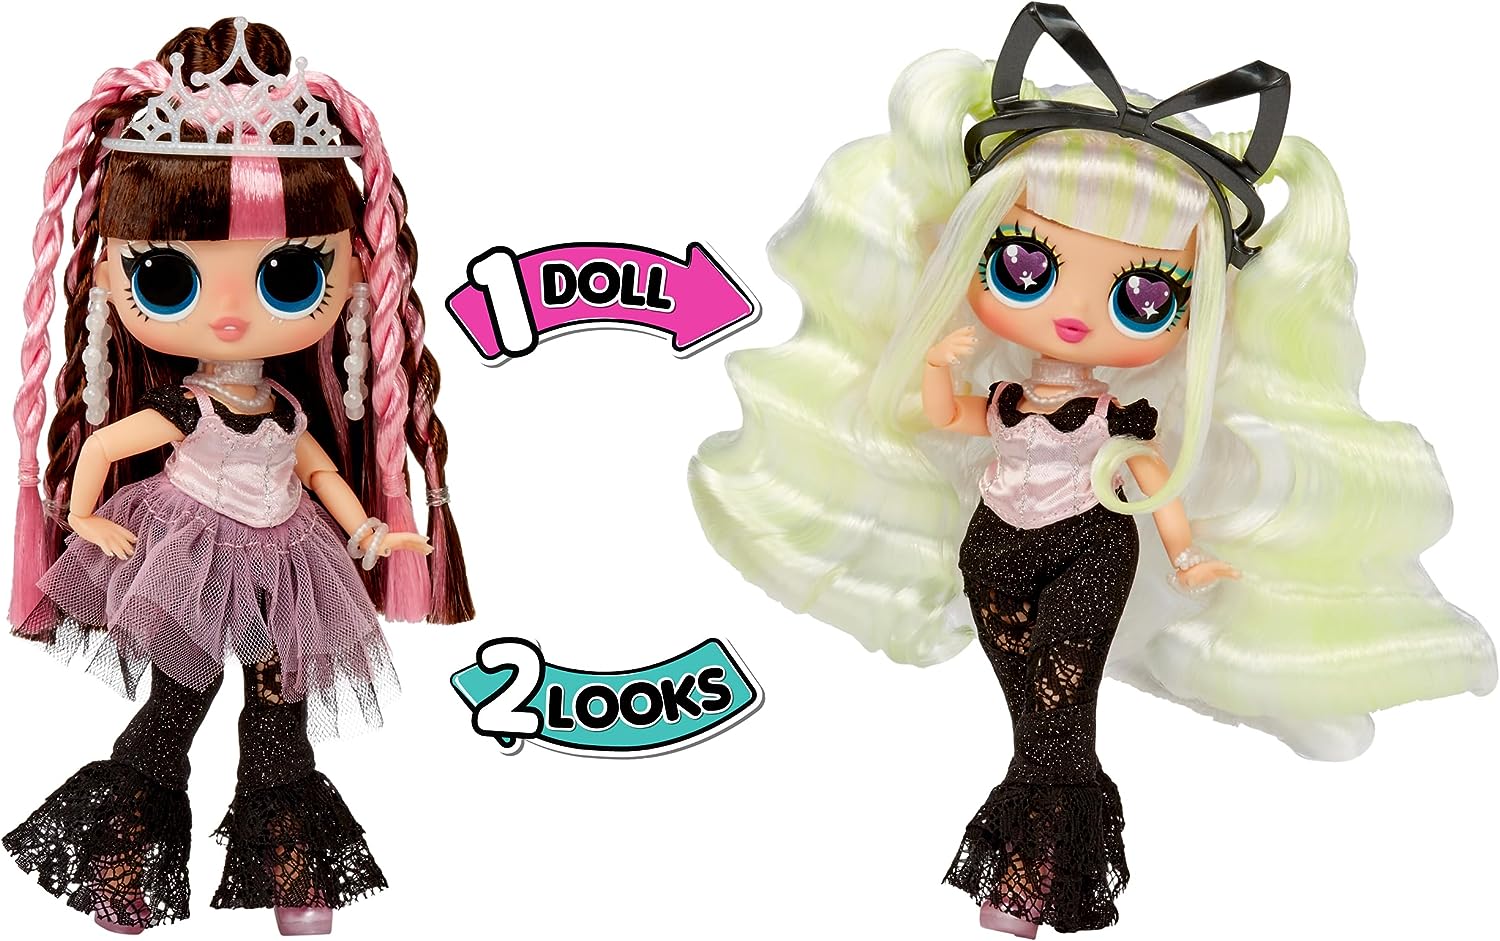 New LOL tweens with interchangeable heads! With little peace sign hands! :  r/Dolls